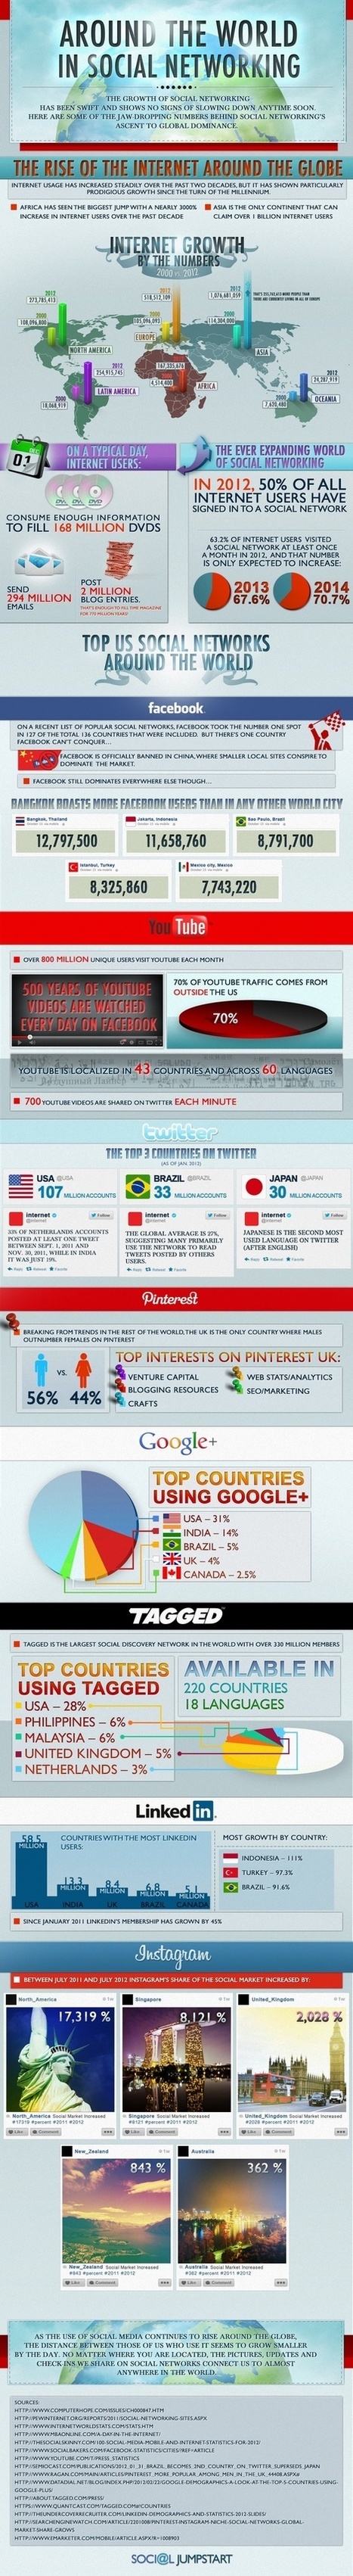 Around the world in Social Media networking - infographic | Business Improvement and Social media | Scoop.it